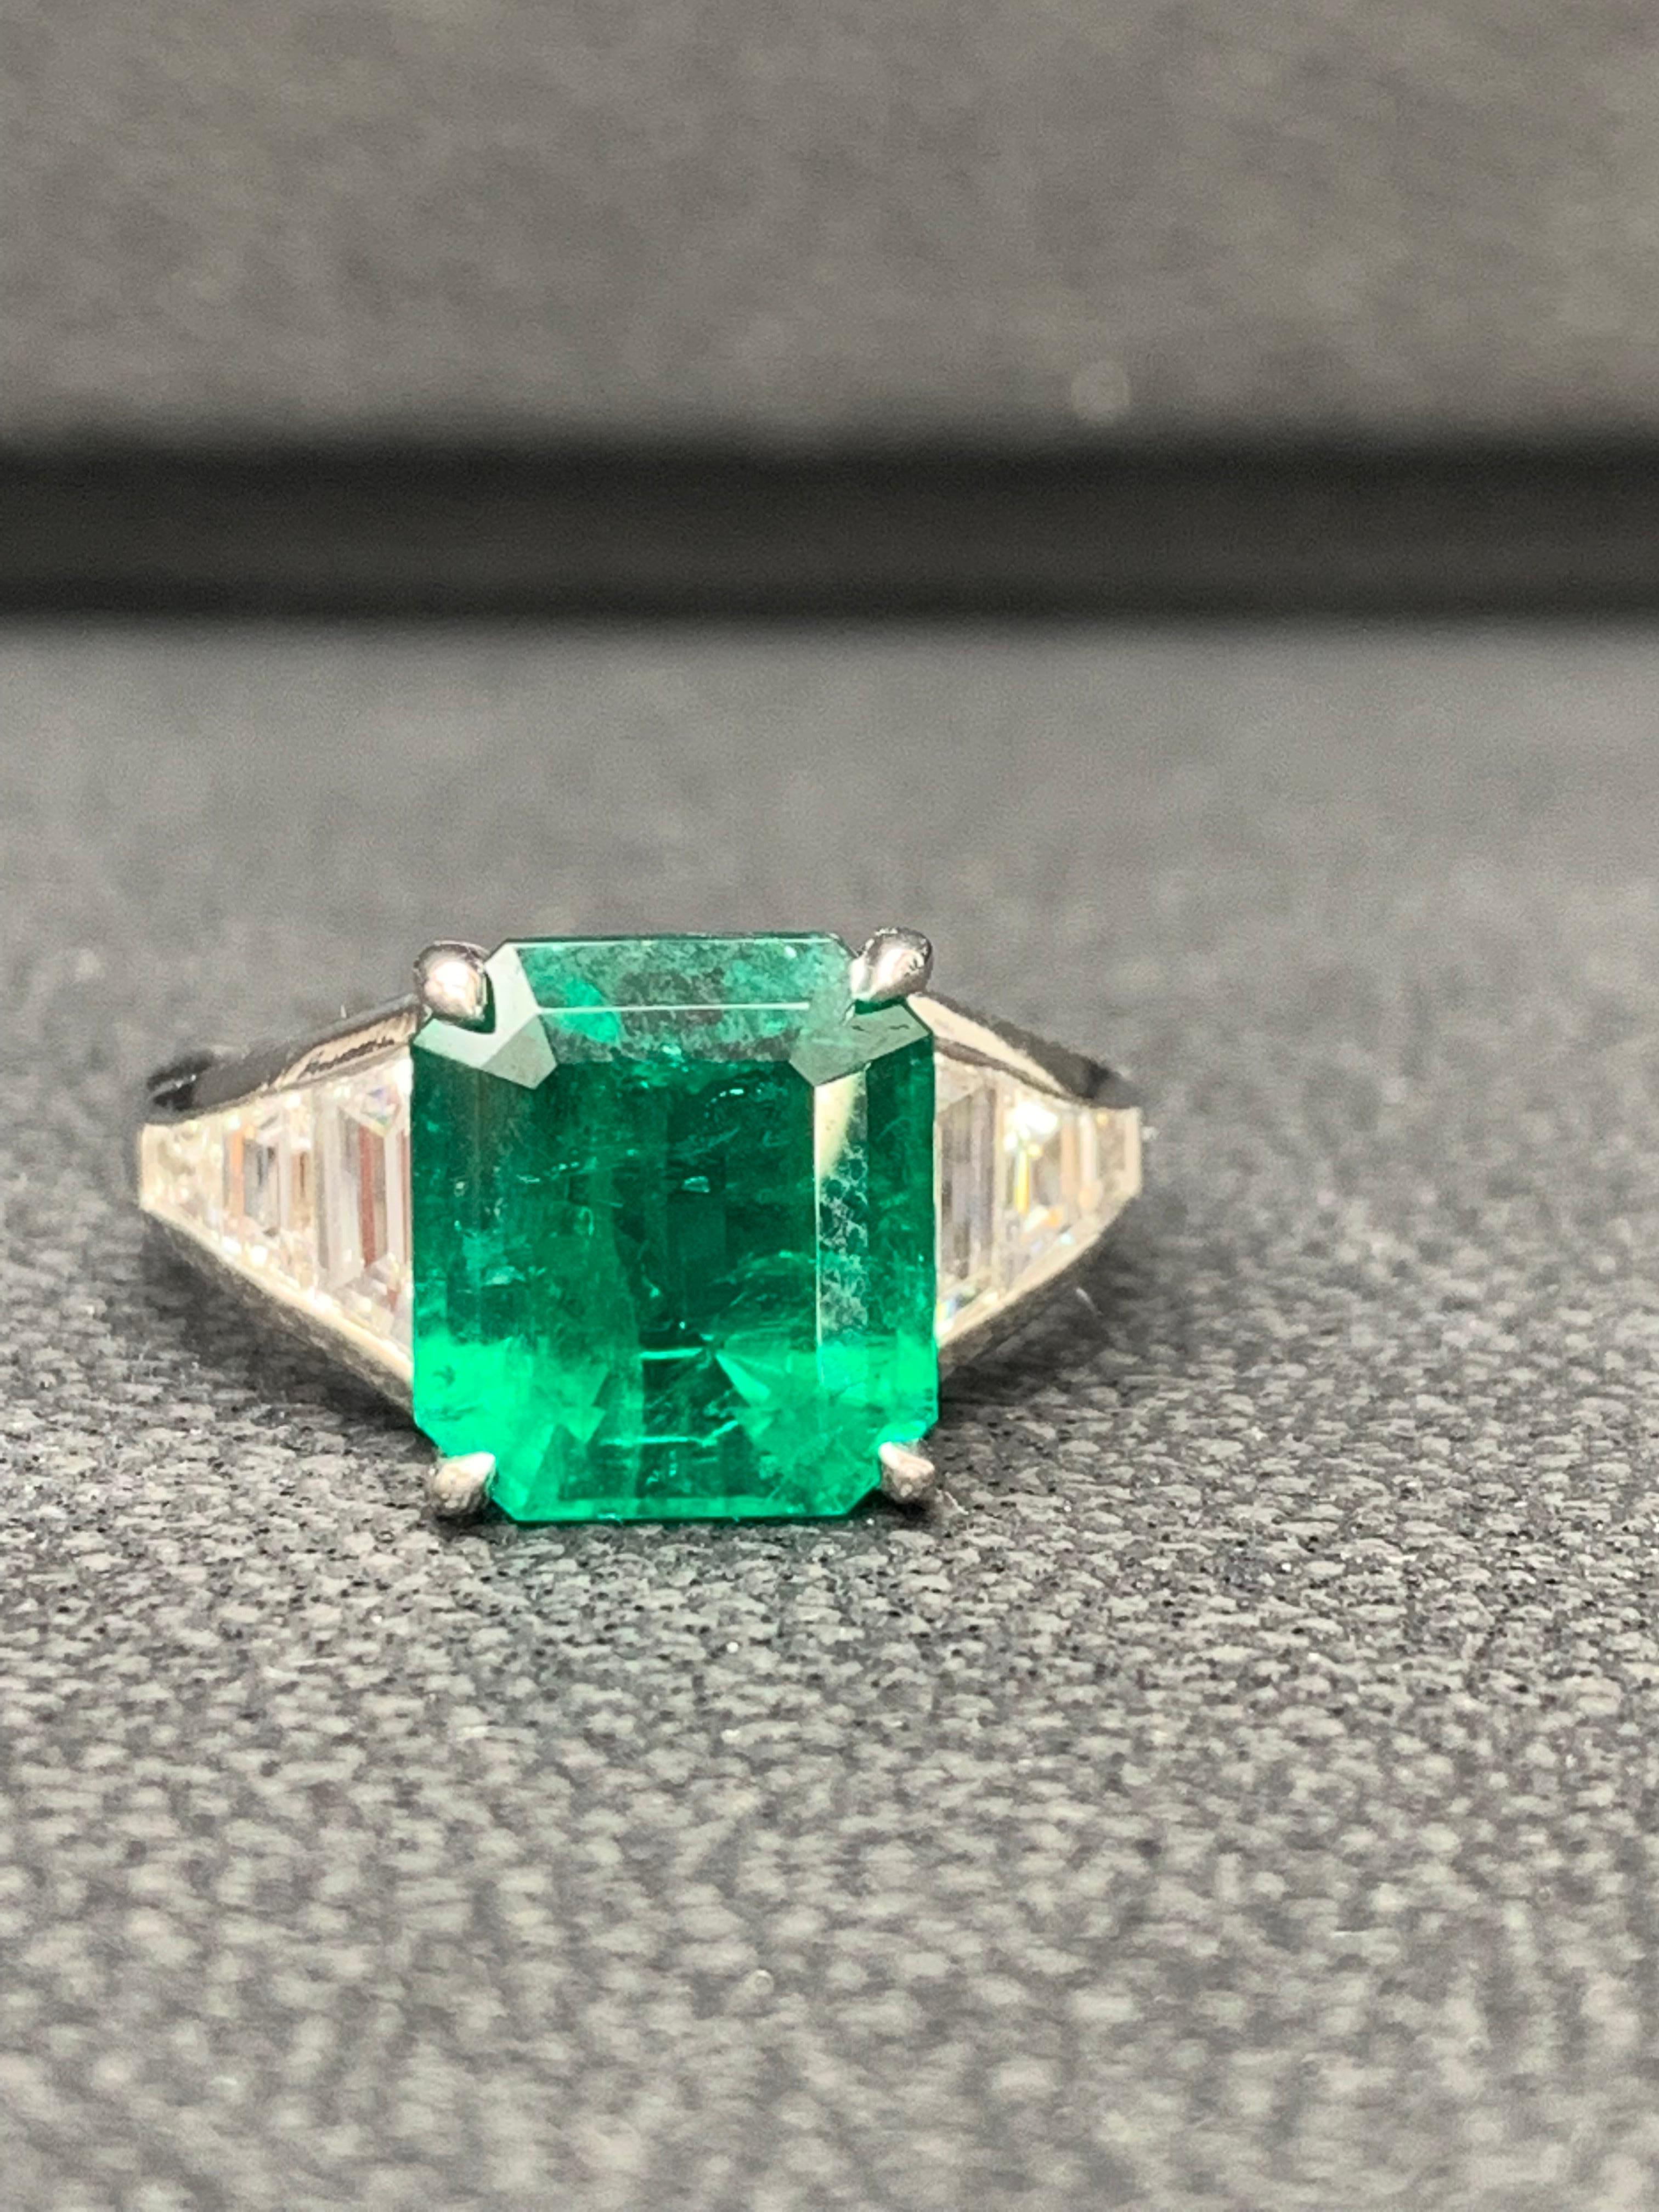 A stunning well-crafted engagement ring showcasing a 3.72-carat  emerald-cut Emerald. Flanking the center diamond are perfectly matched graduating trapezoid diamonds, channel set in a polished platinum mounting. 6 Accent diamonds weigh 1.05 carats